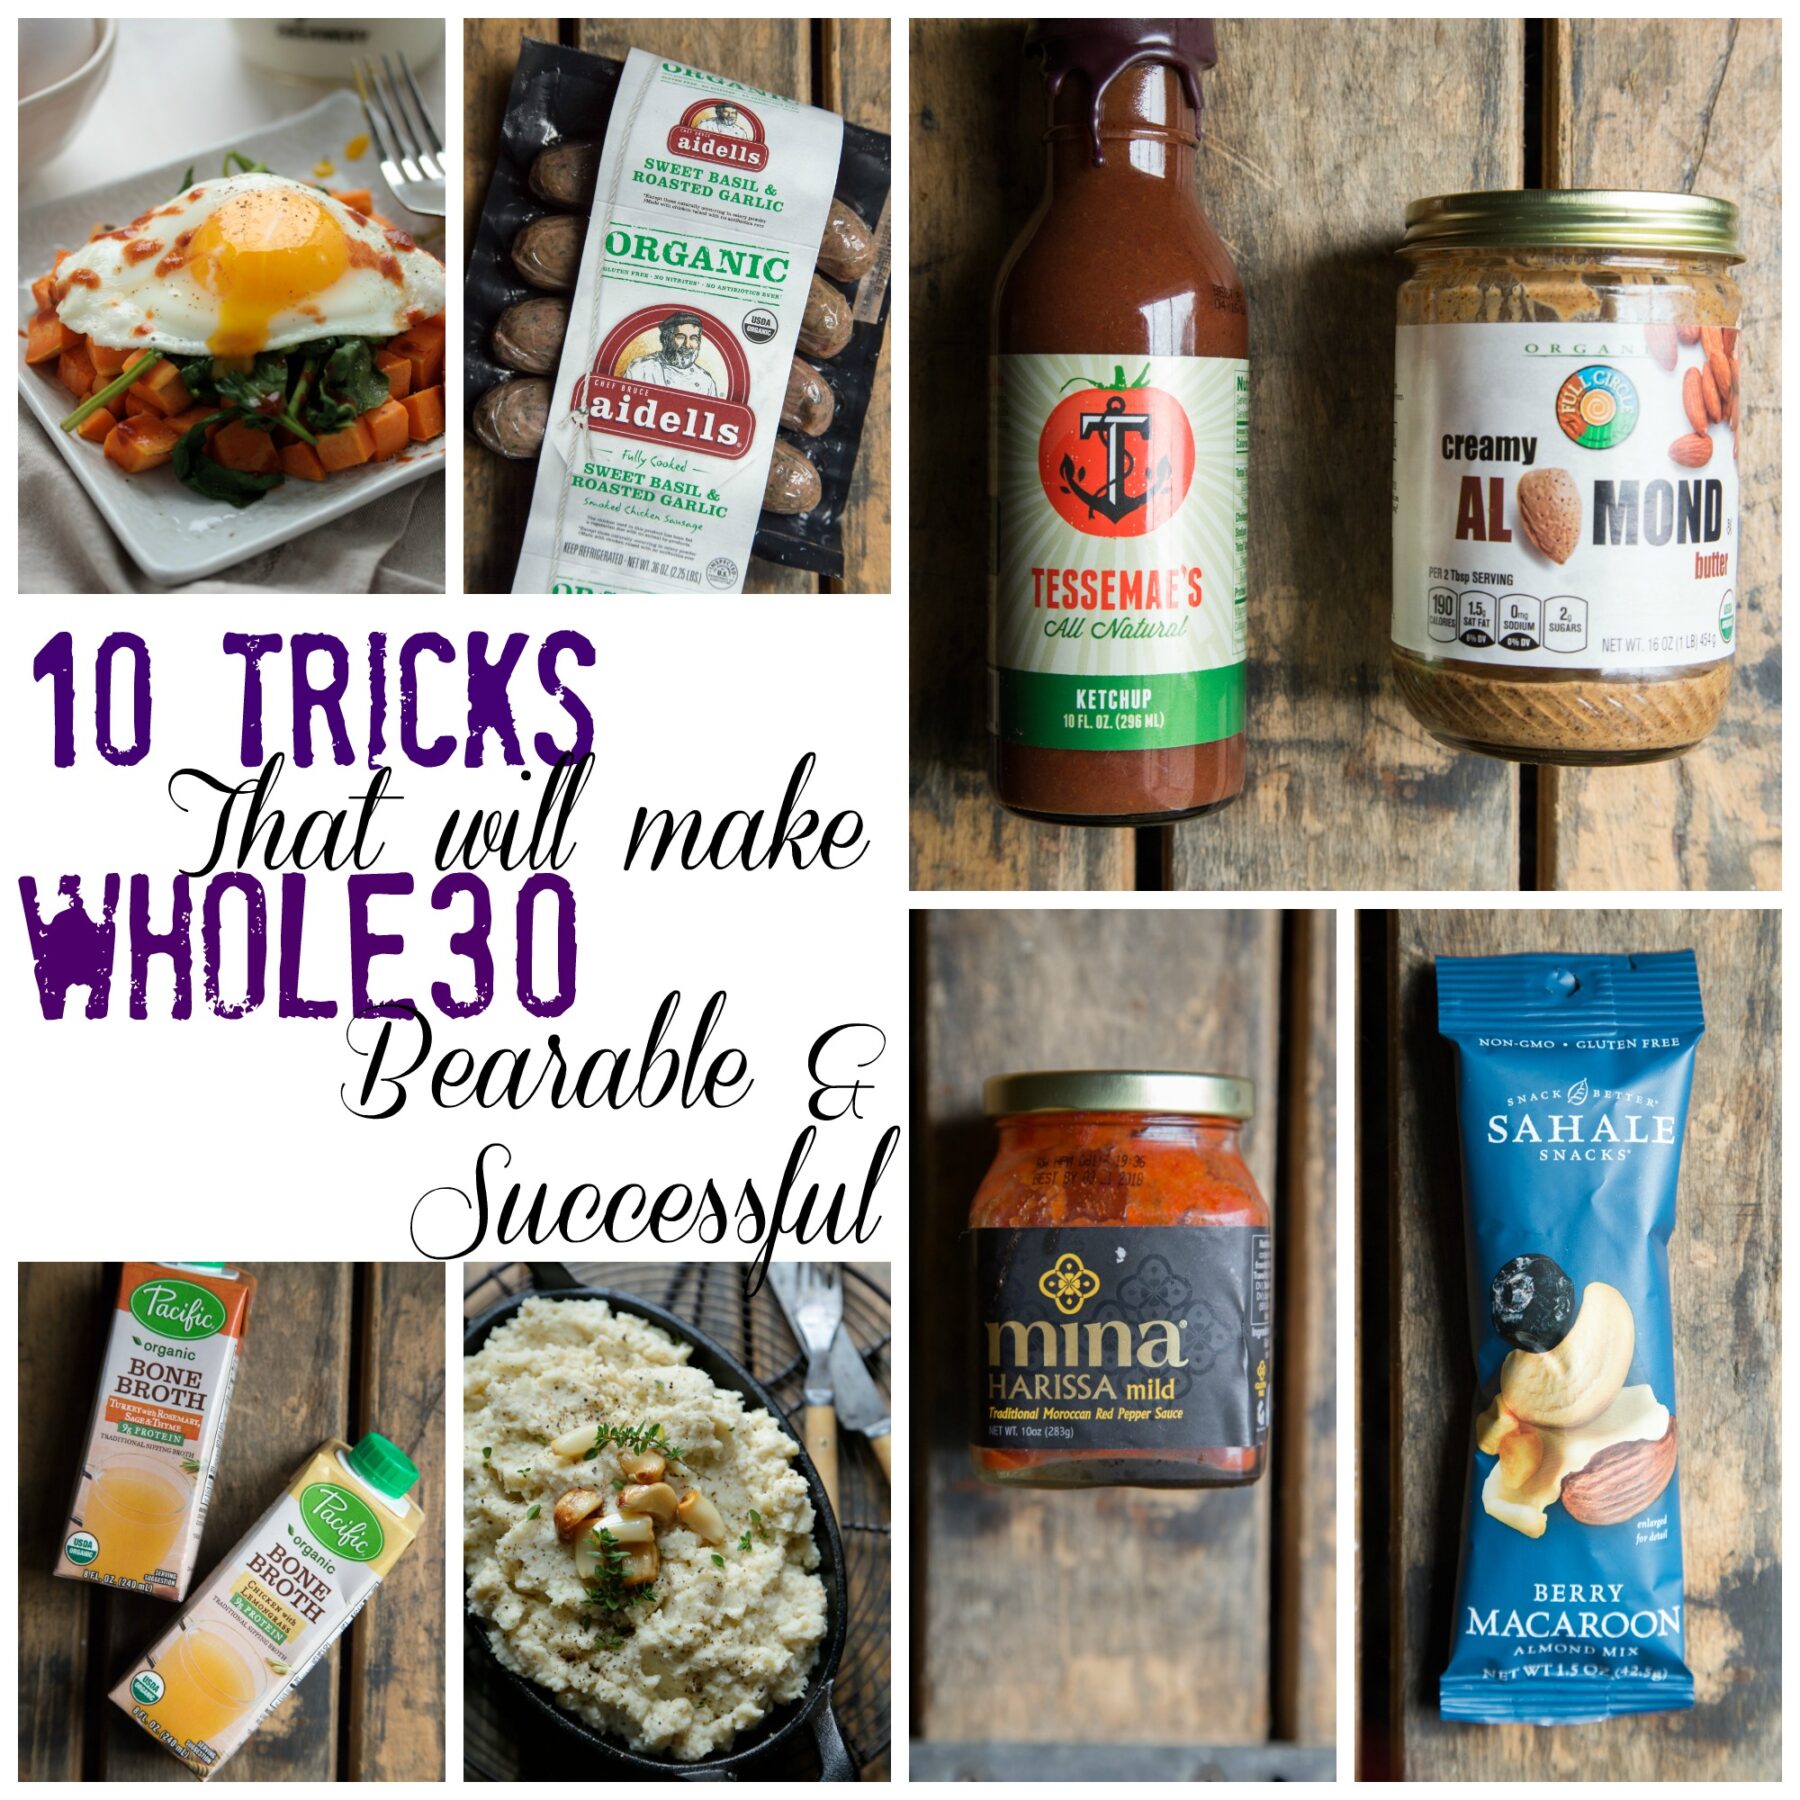 10 Things That Will Make Whole30 Bearable - Homemade Home